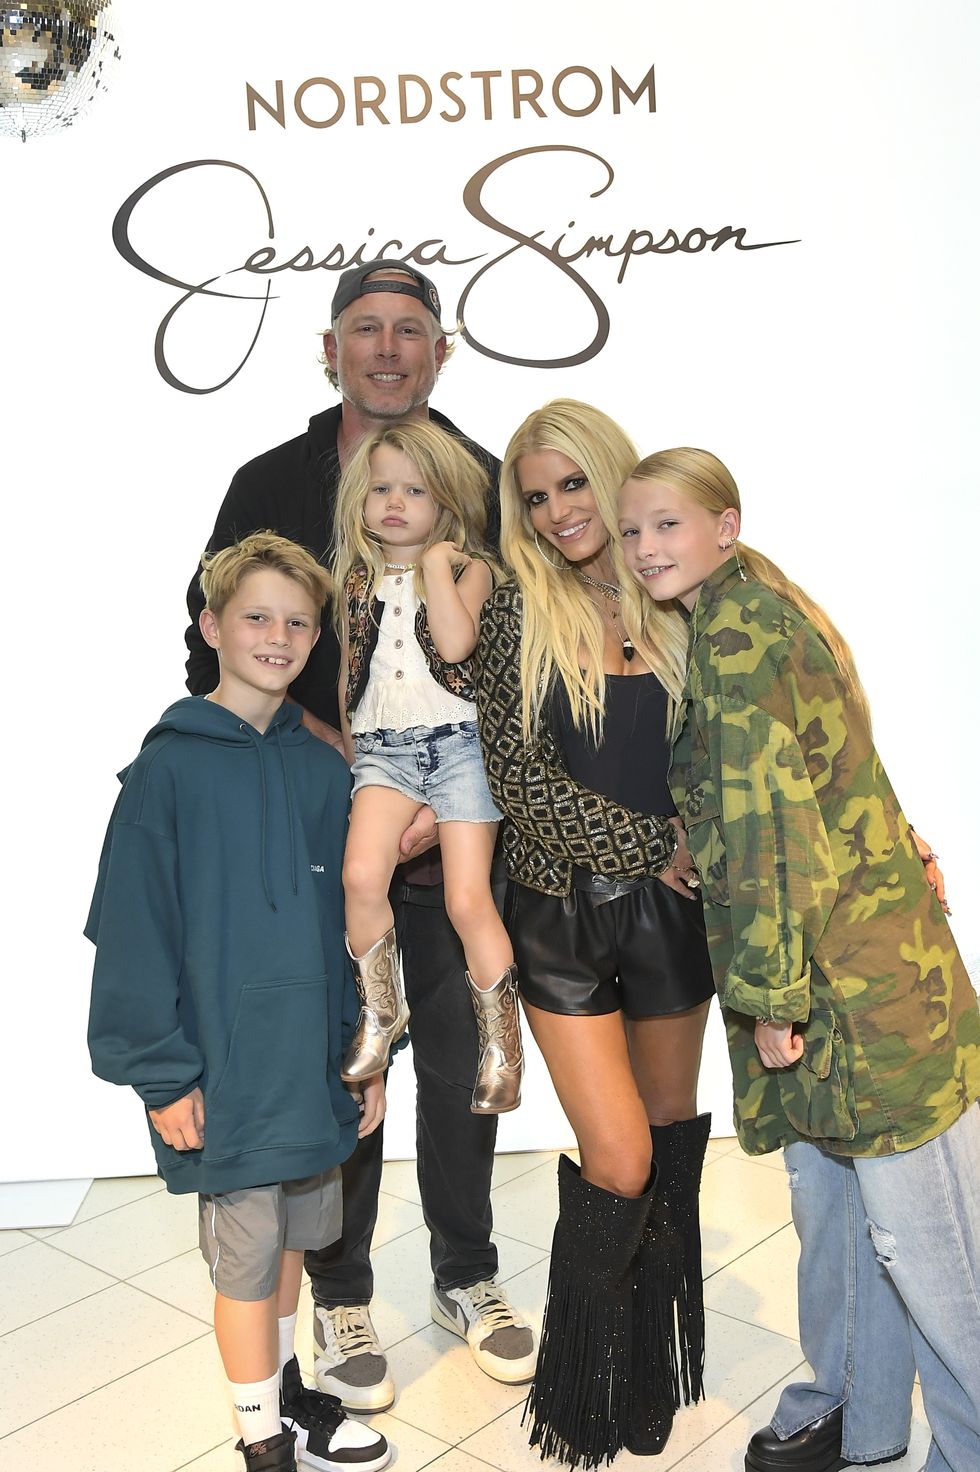 jessica simpson celebrates the launch of her fall collection with fans at nordstrom including a special performance by the la roller girls